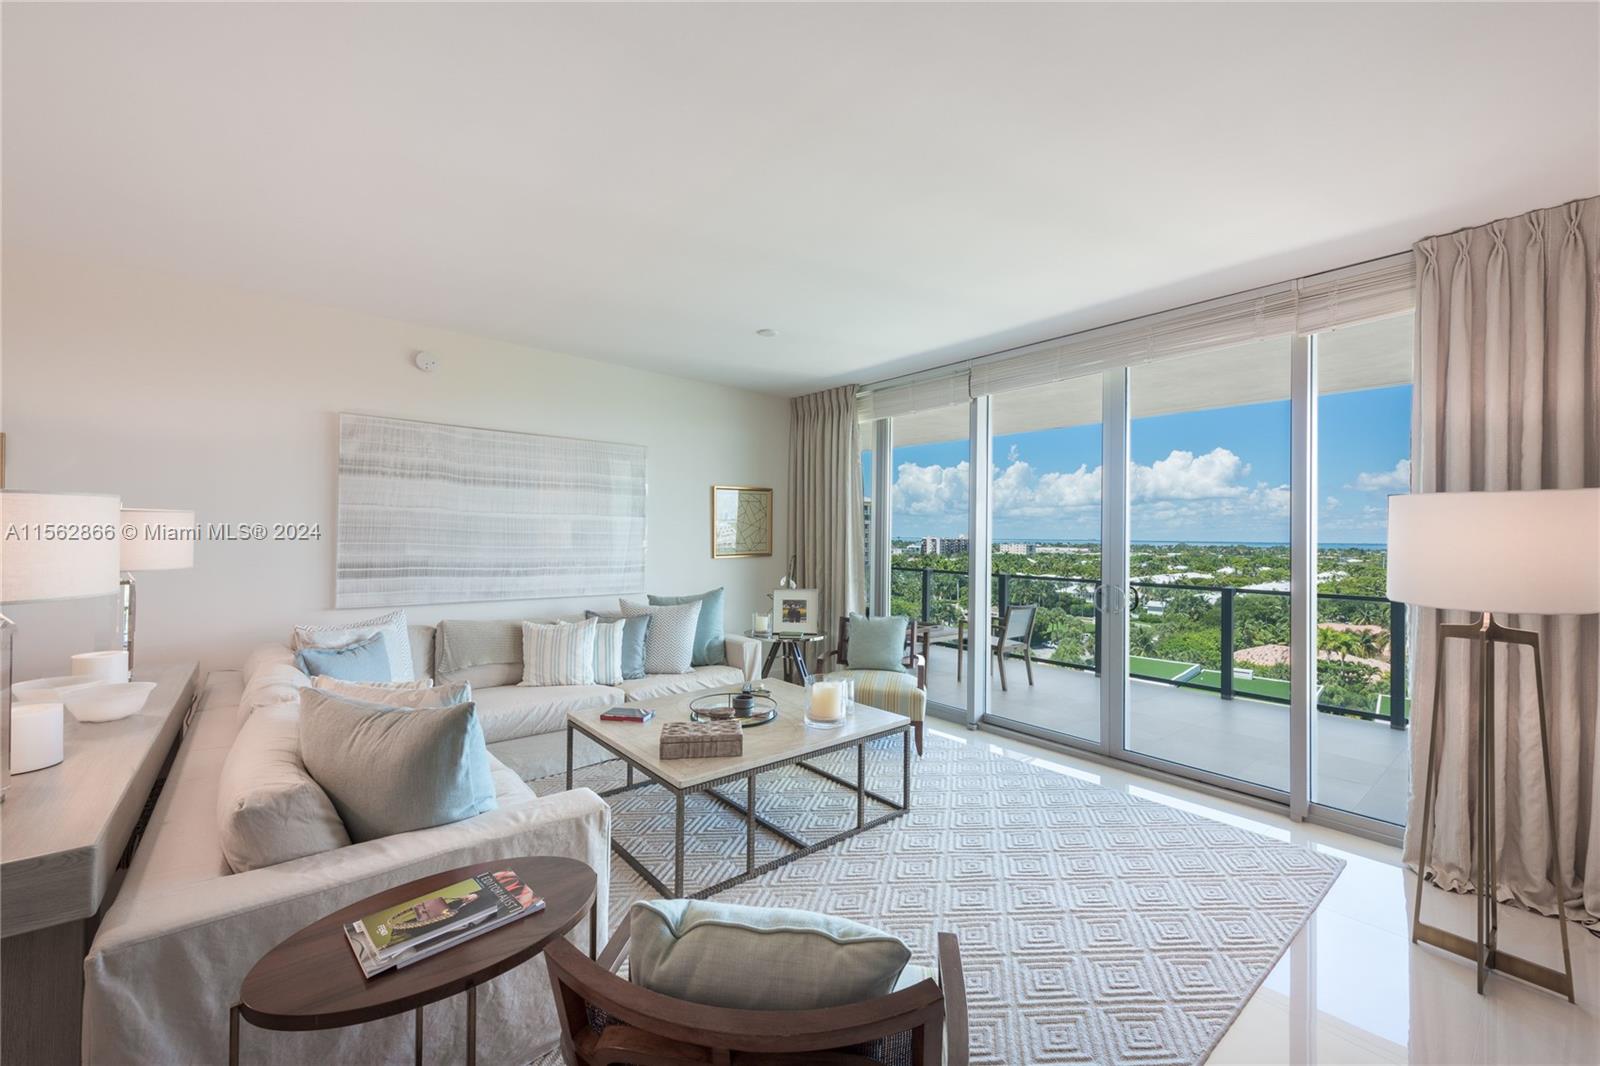 NO ANNUAL LEASES - MIN 2 MONTHS! Fully furnished with exquisite taste! 2 bedrooms + ENCLOSED DEN + 2.5 bathrooms. Amazing views to the island of Key Biscayne. Enjoy the most exclusive building in Key Biscayne and its amenities which include gym, spa, pool, restaurant on site and beach access. AVAILABLE NOW! UNIT IS NOT AVAILABLE FOR THE WINTER SEASON (its already rented for the period of December 27th 2024 - April 30th 2025).